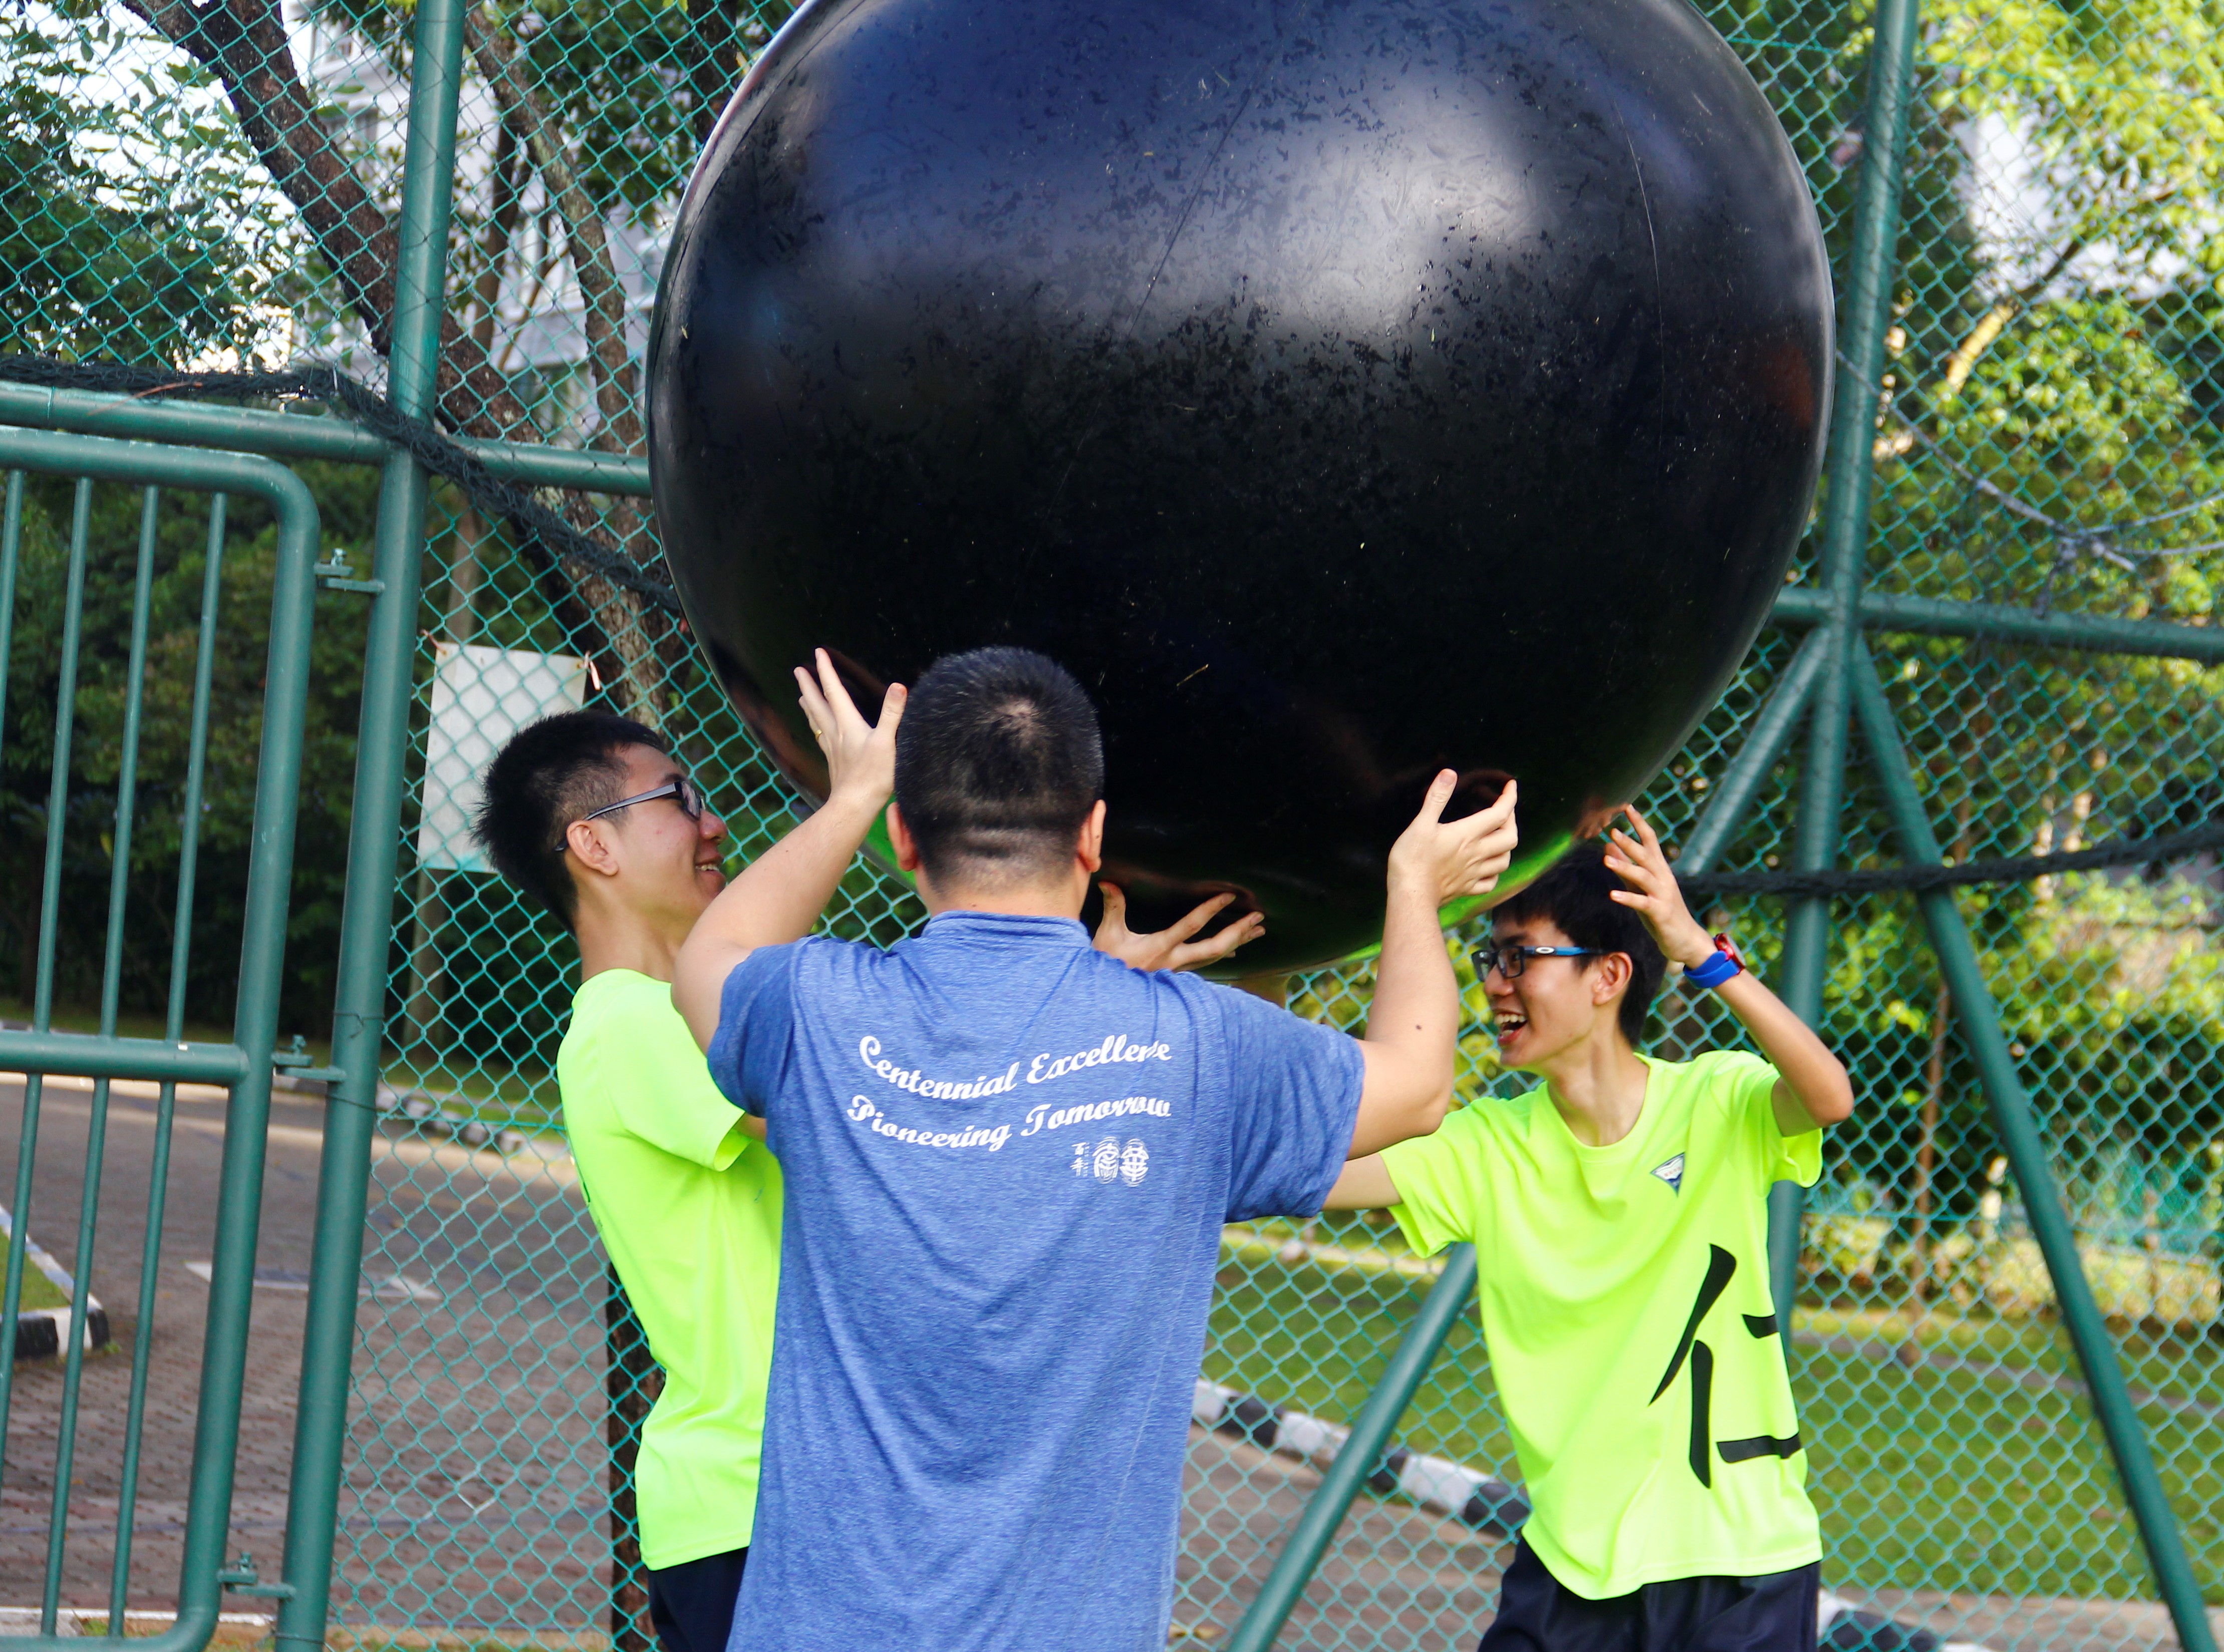 Teacher and students play together during a Kinball session